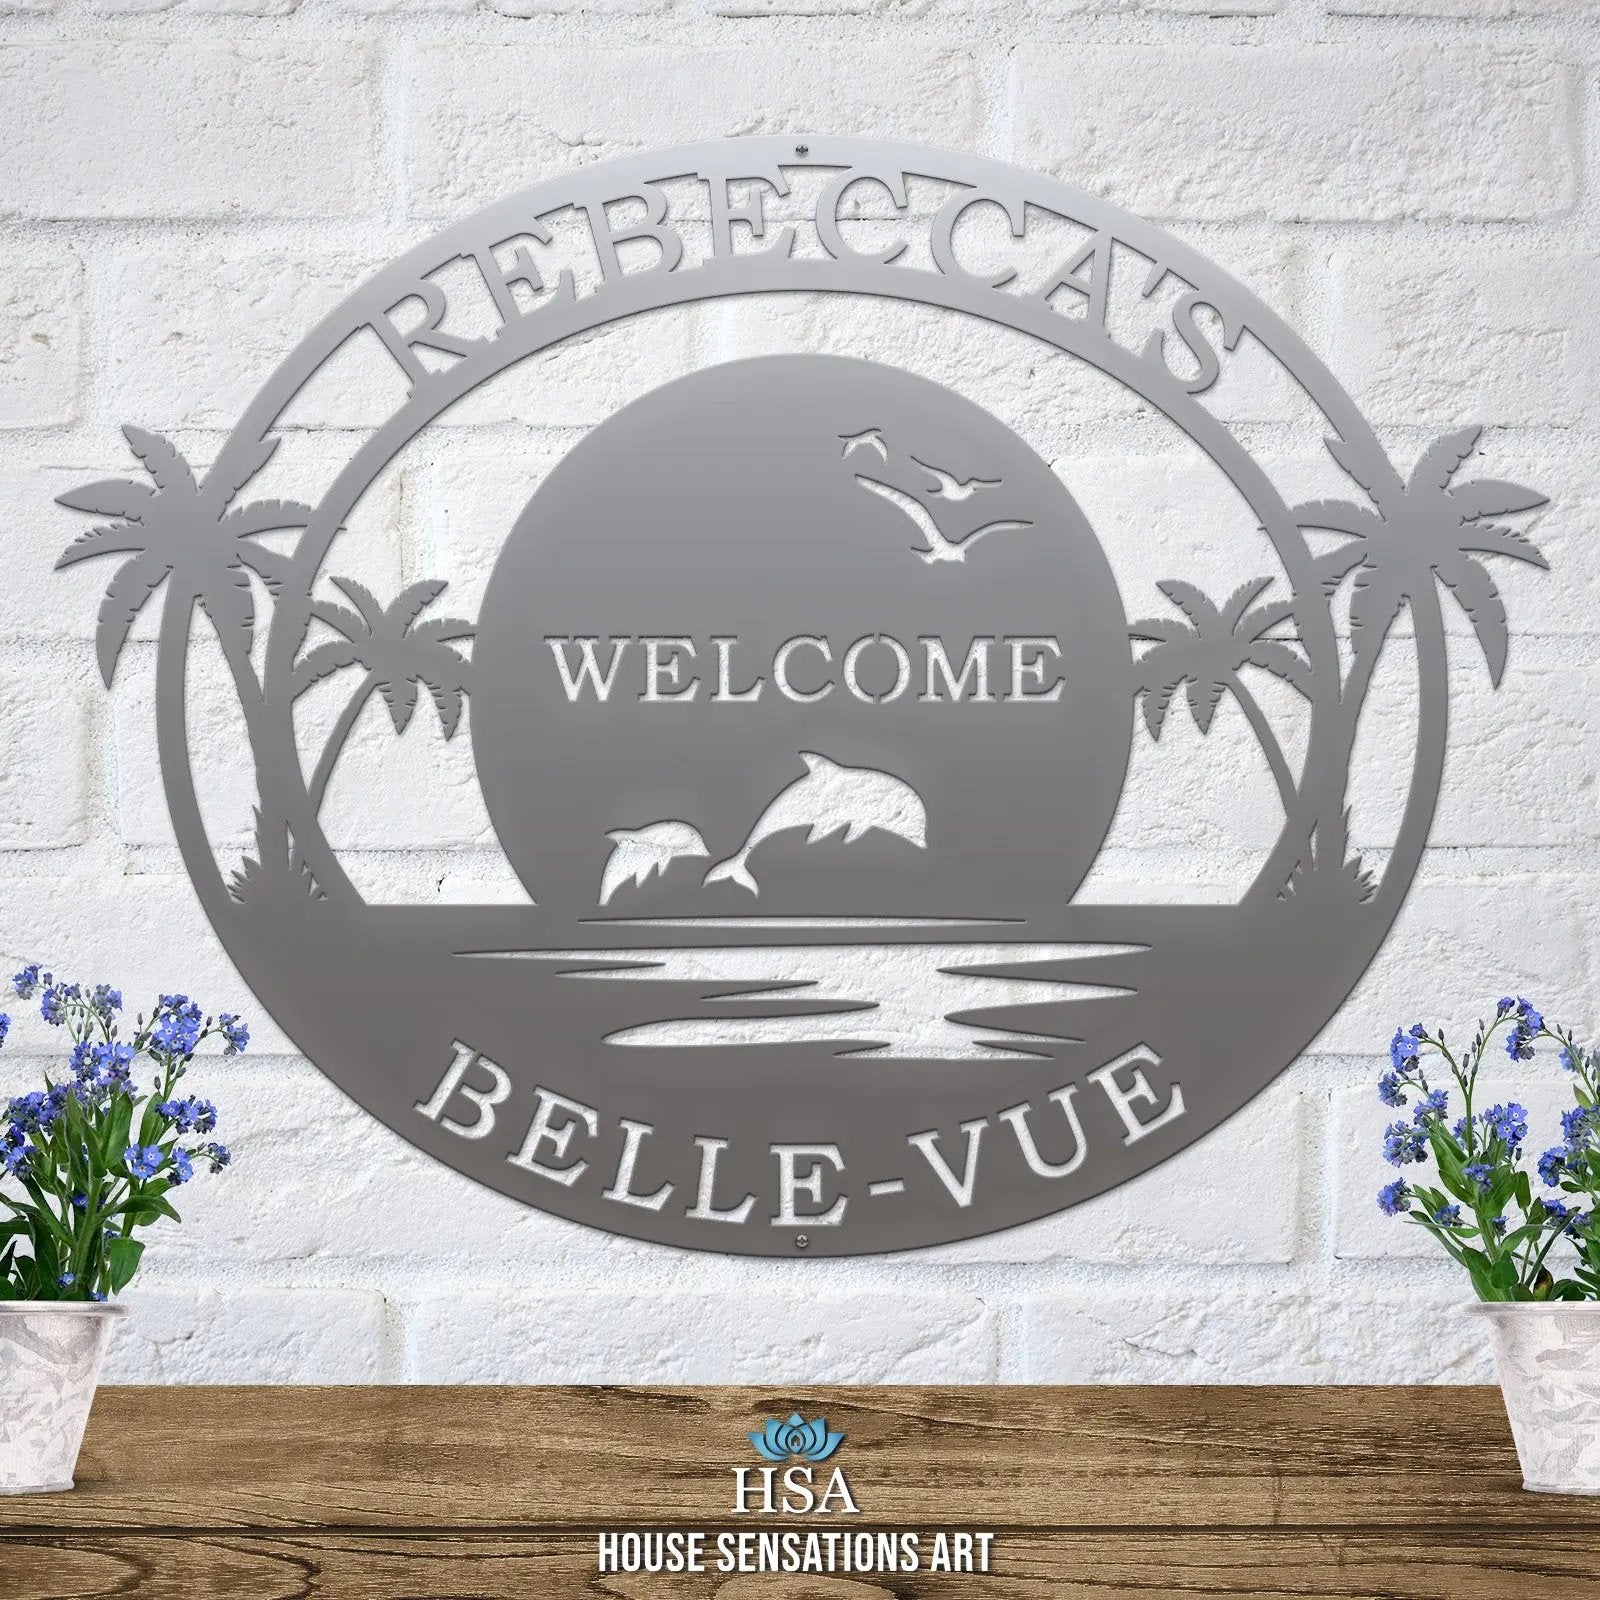 Personalized Metal Beach Sign with Palm Trees Nautical Decor House Sensations Art   